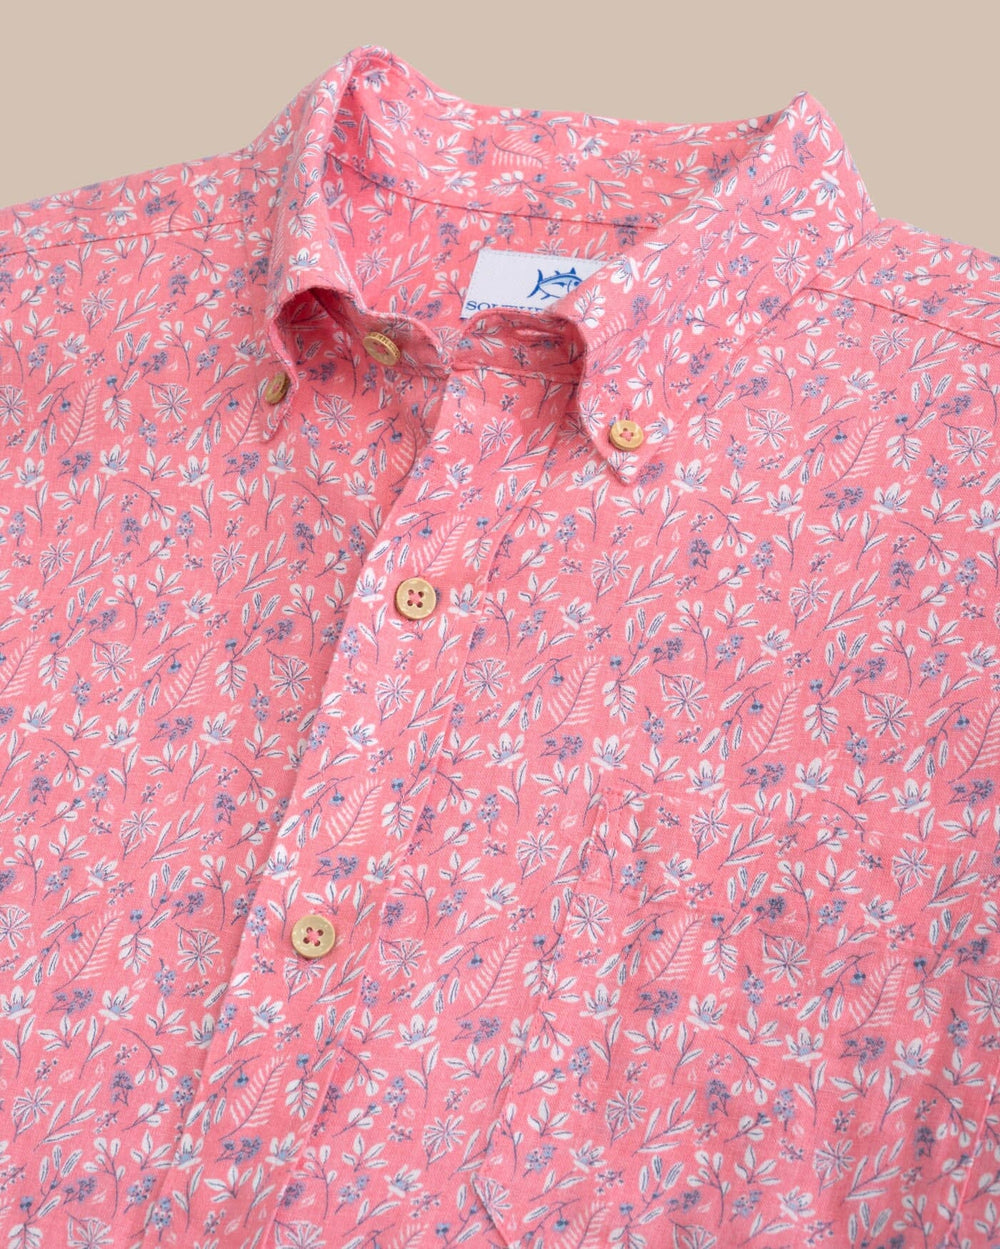 The detail view of the Southern Tide Linen Rayon Ditzy Floral Short Sleeve Sport Shirt by Southern Tide - Geranium Pink